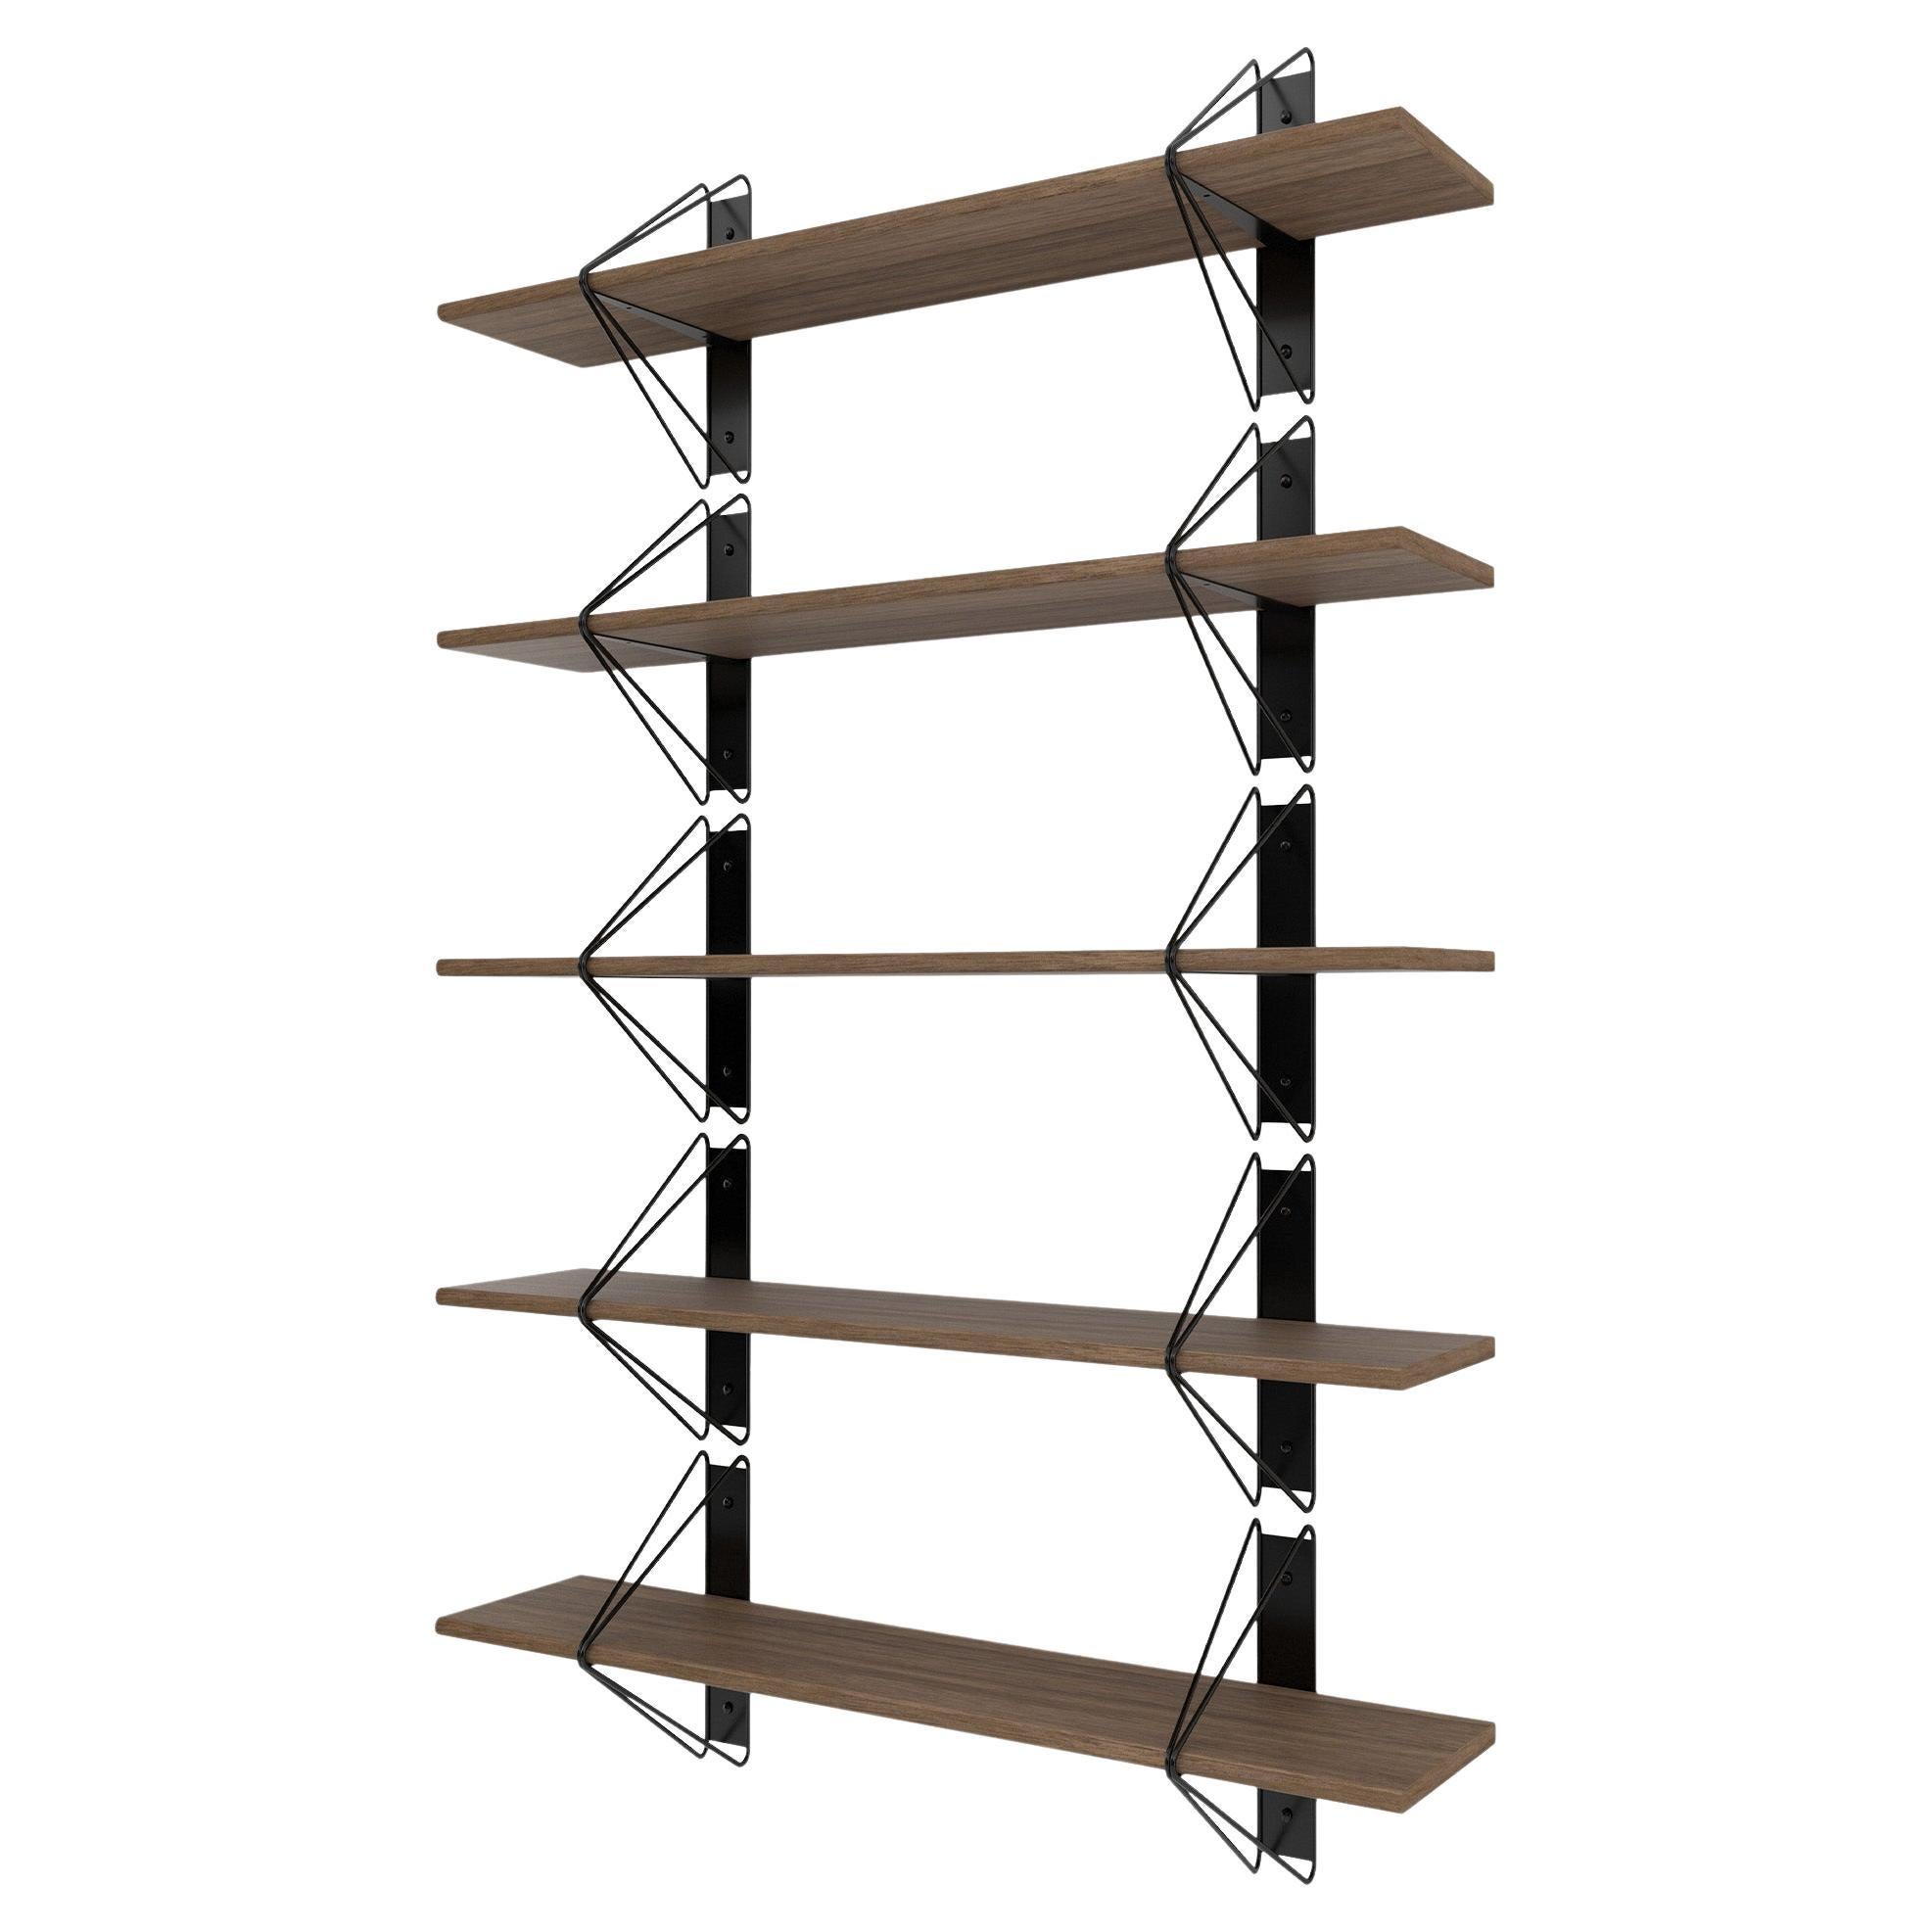 Set of 5 Strut Shelves from Souda, Black and Walnut, Made to Order